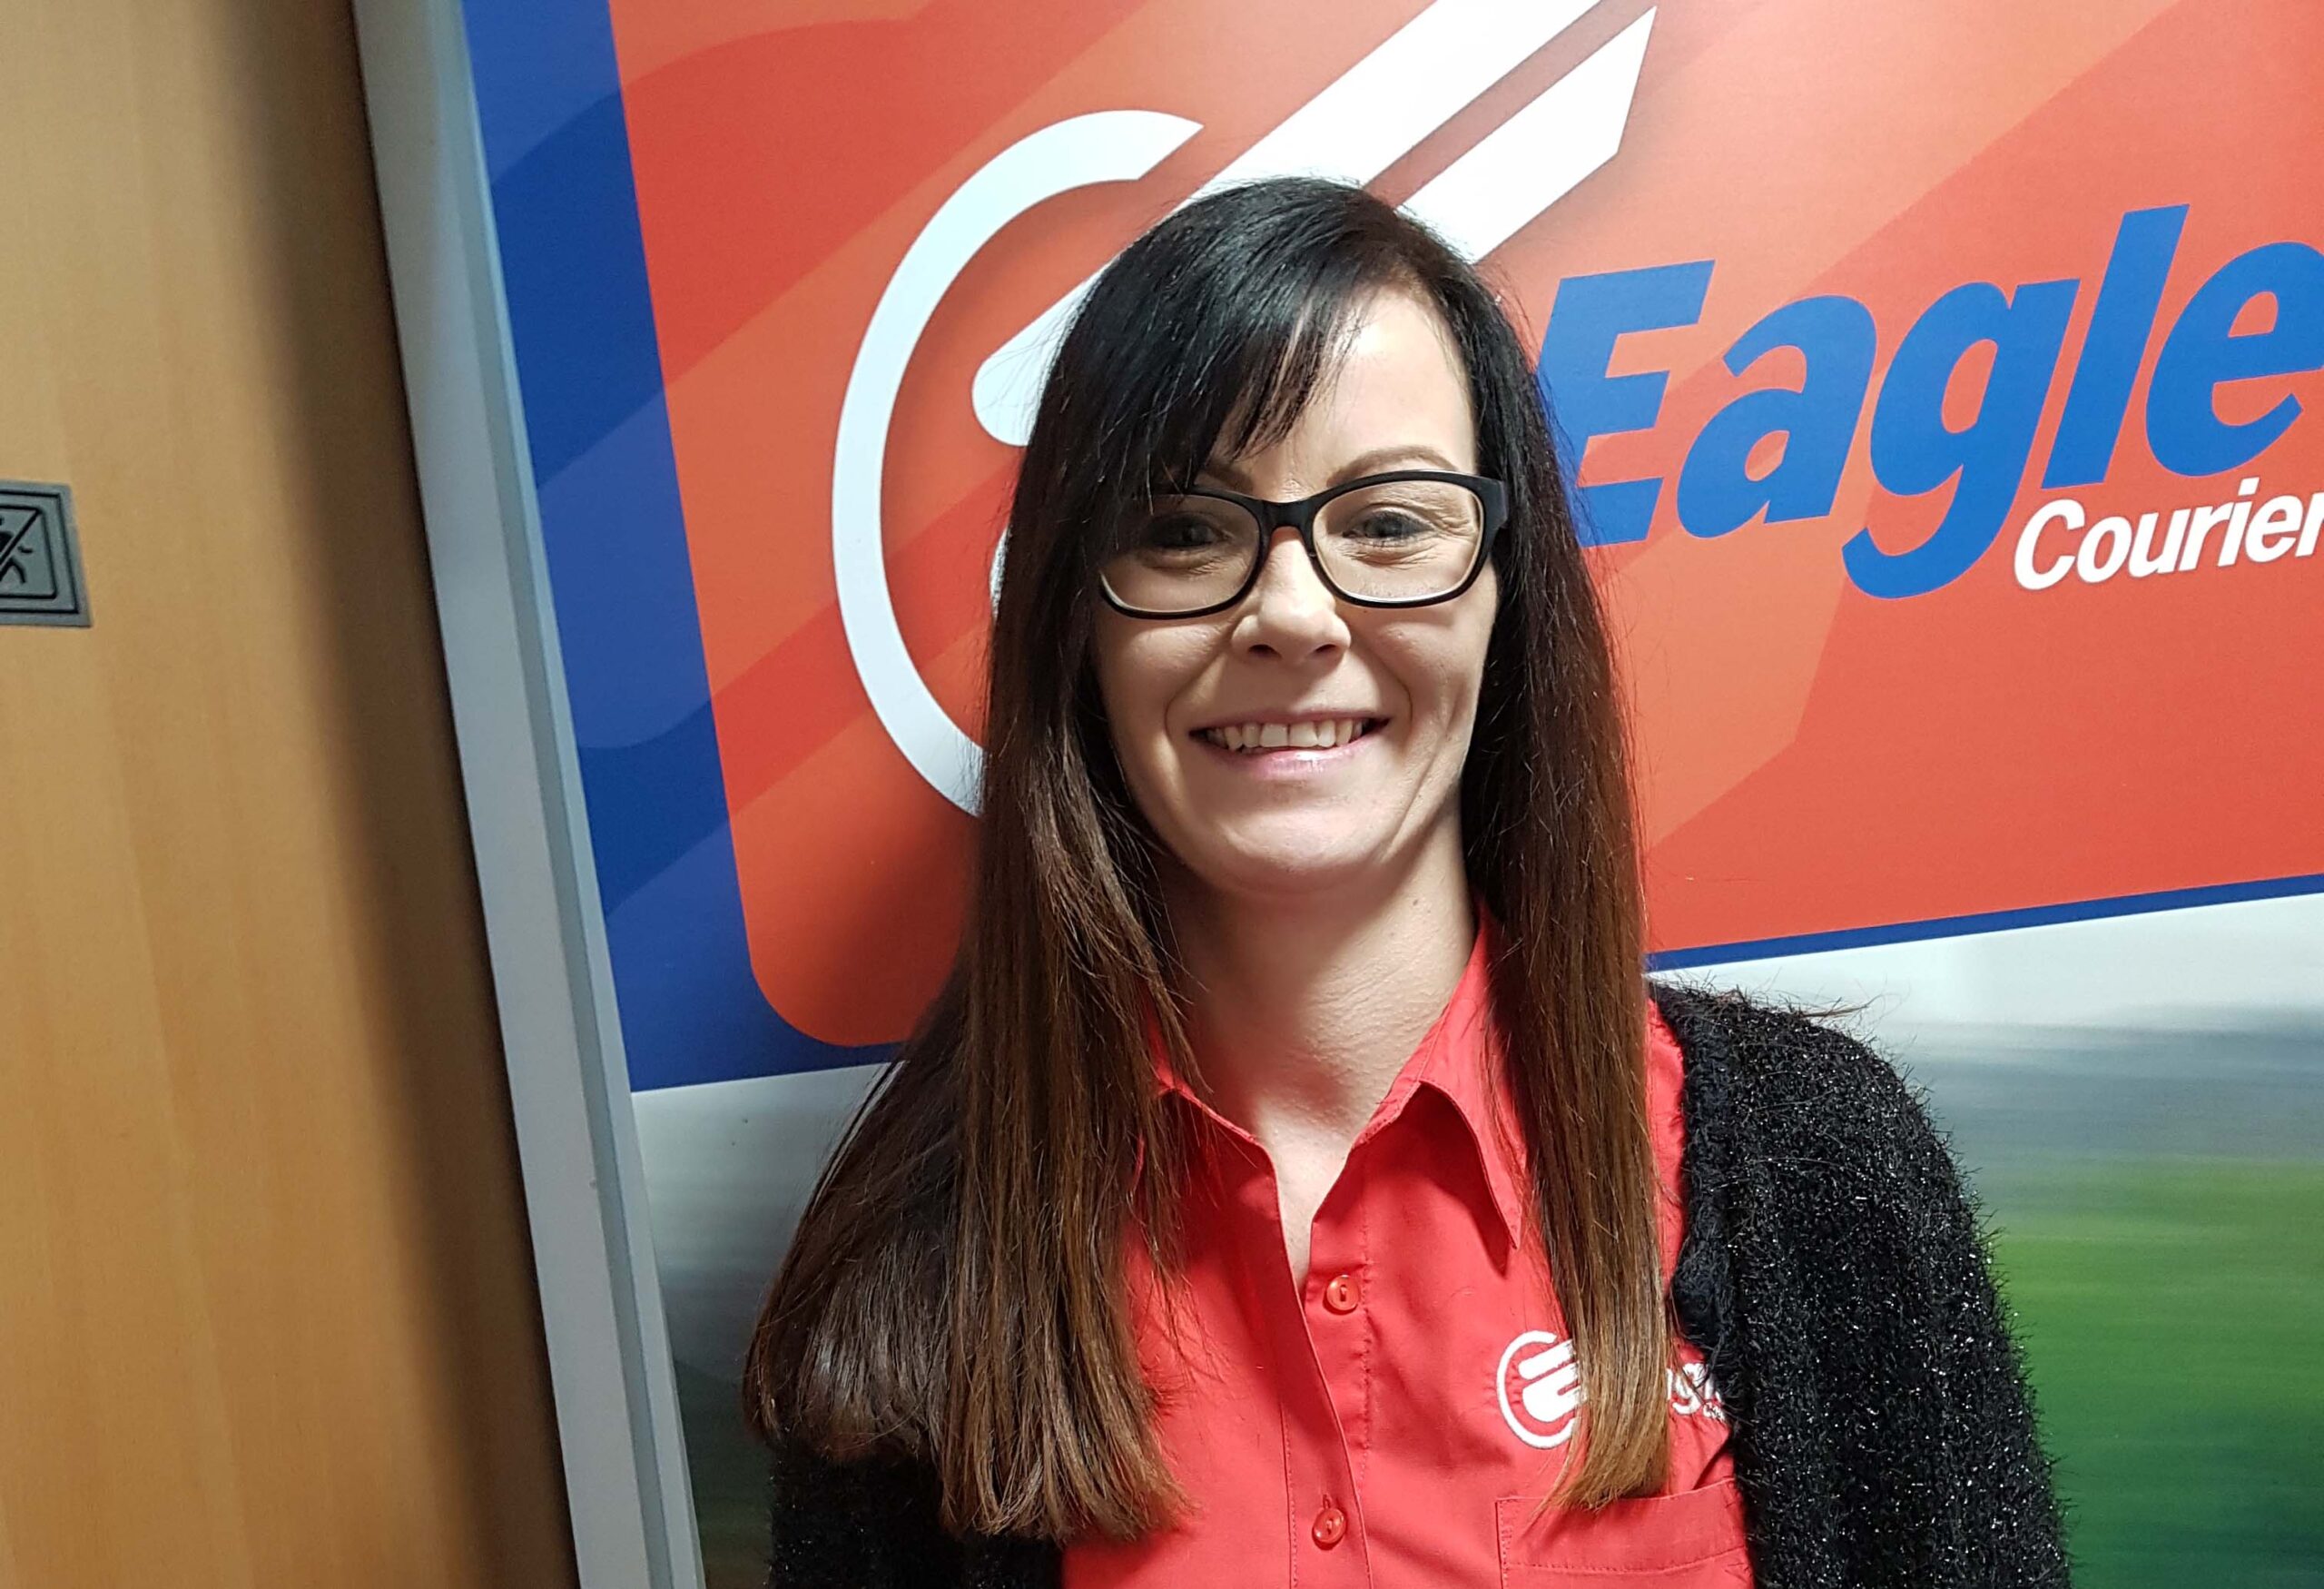 Louise employee of Courier Scotland company, Eagle Couriers